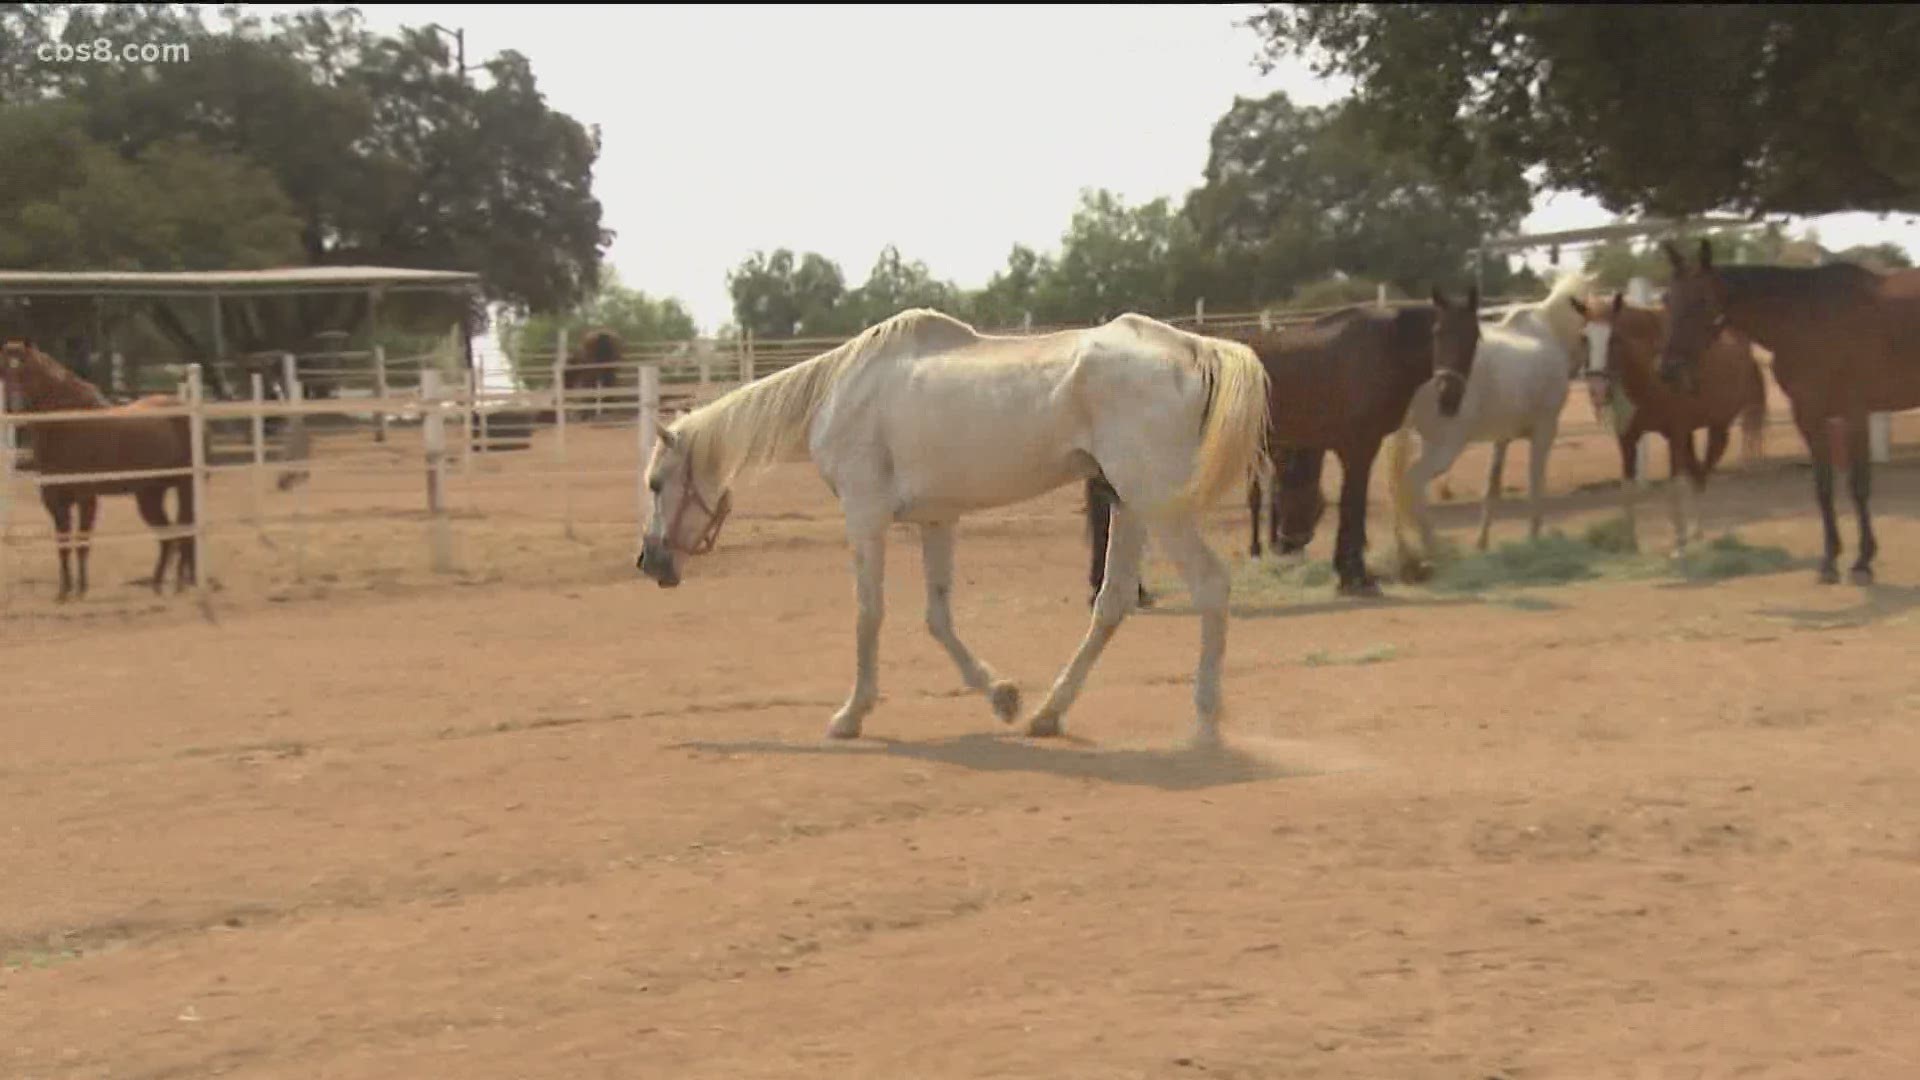 News 8 viewers wrote in concerned about the health and well-being of the horses after seeing them in being evacuated from the Valley Fire.